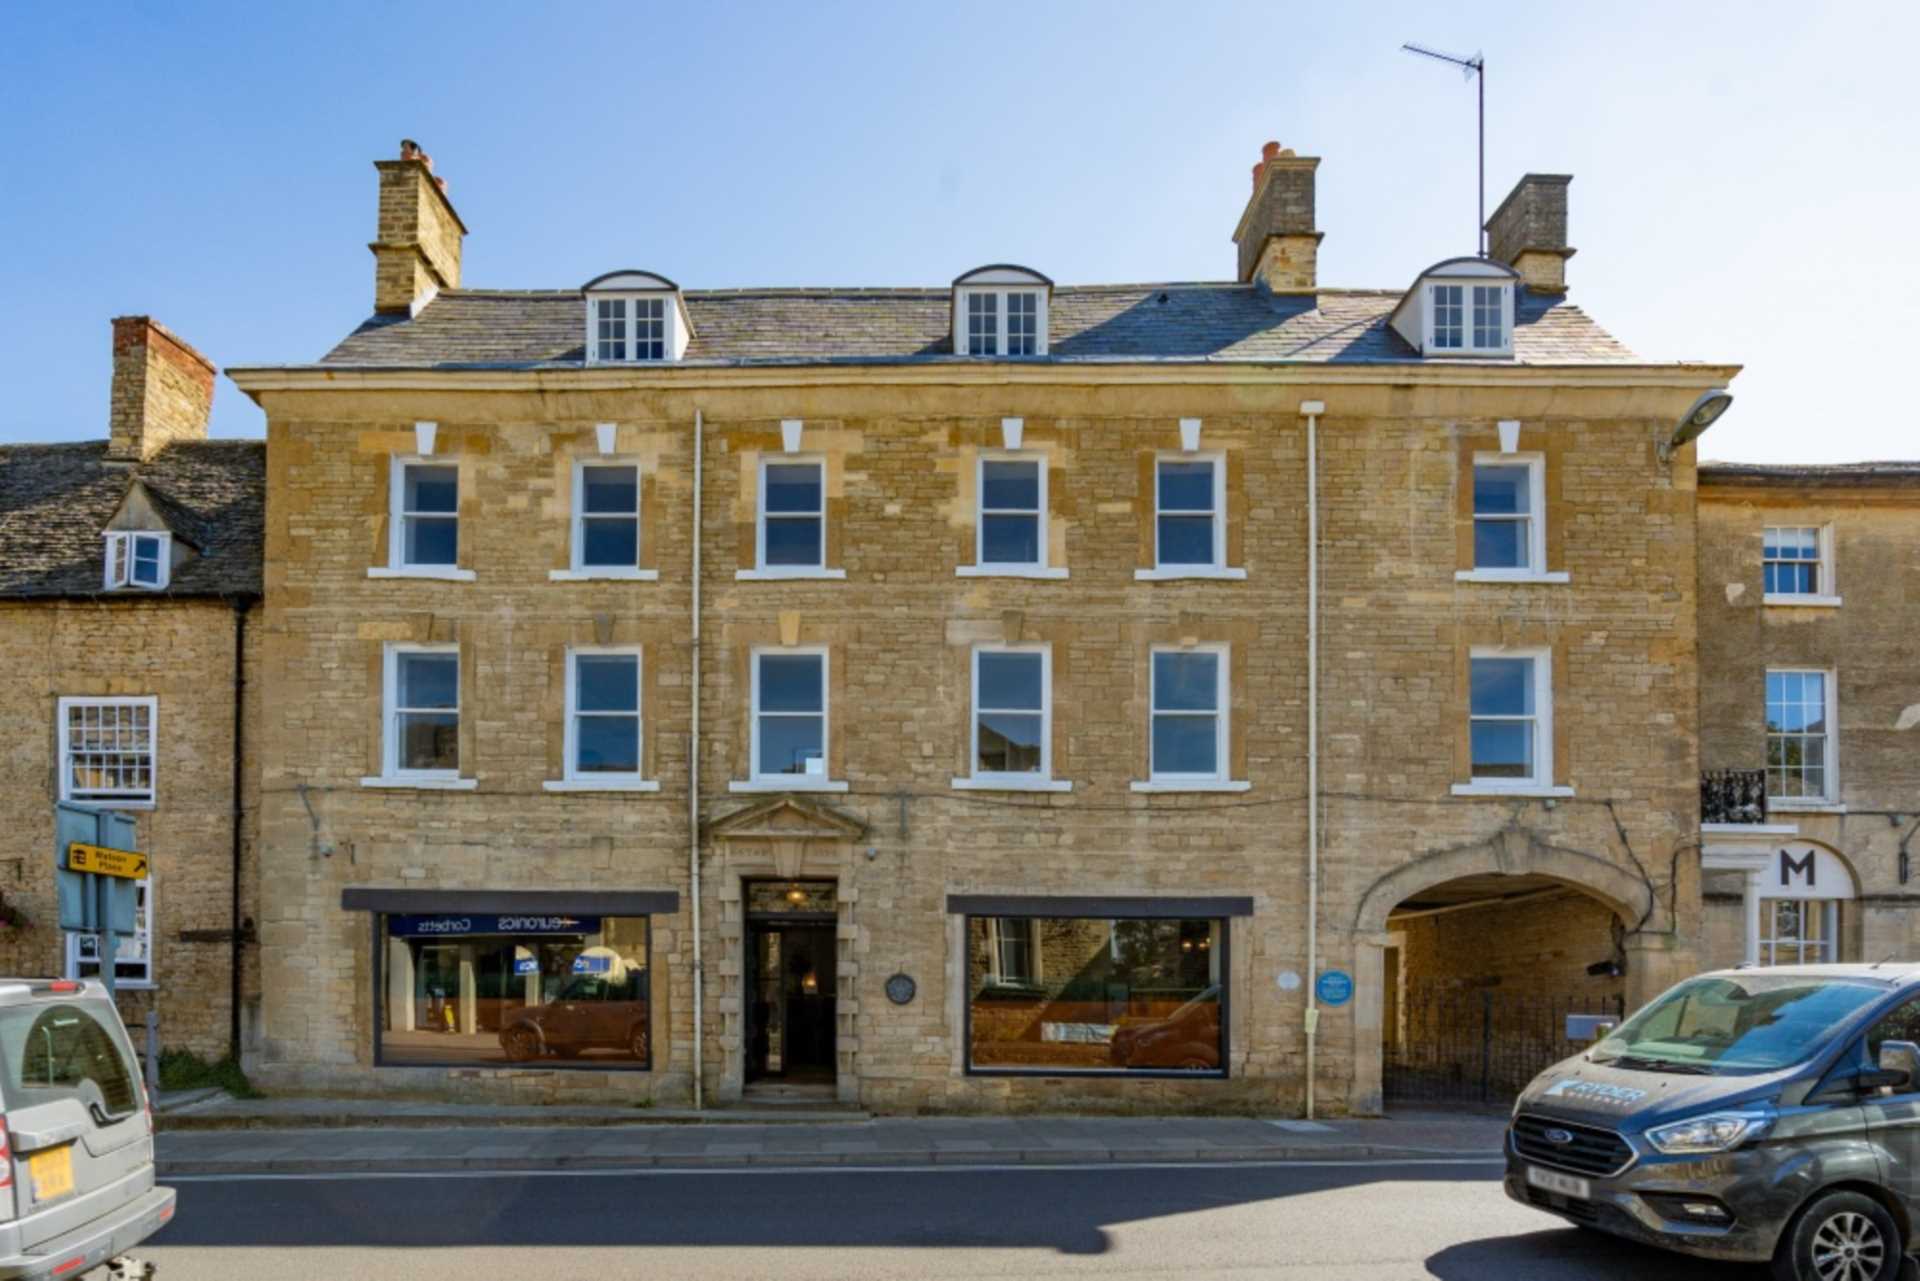 West Street, Chipping Norton, Image 7